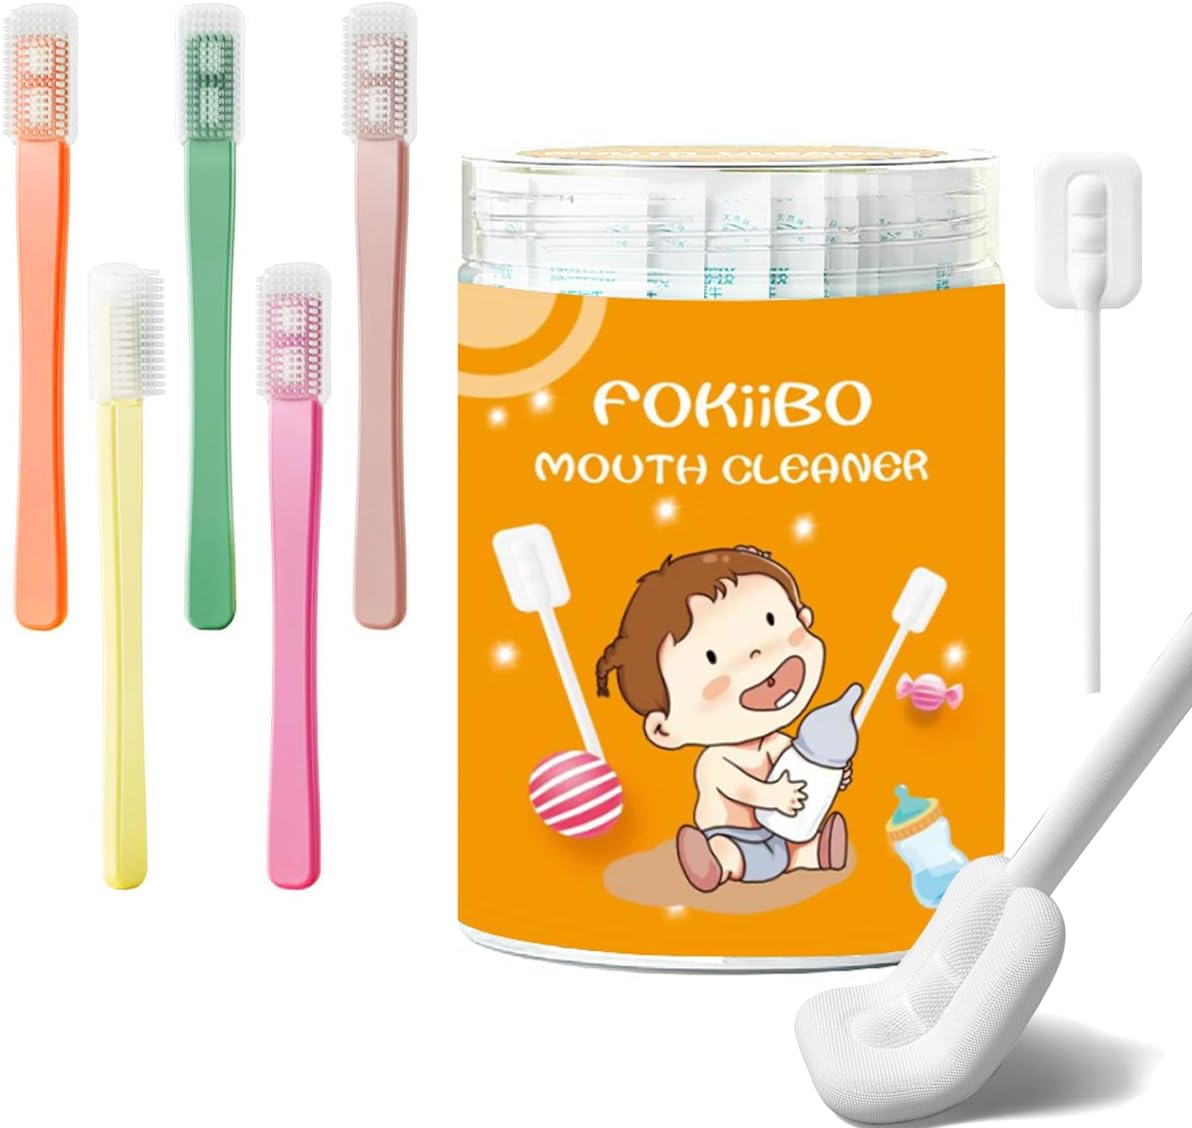 Baby Tongue Cleaner, Baby Toothbrush for Newborn 0-6 Month, 40Pcs Disposable Gauze Baby Mouth Cleaner + 5Pcs Infant Silicone Toothbrush, Baby Oral Cleaner, Soft Baby Gum Toothbrush (45PC)